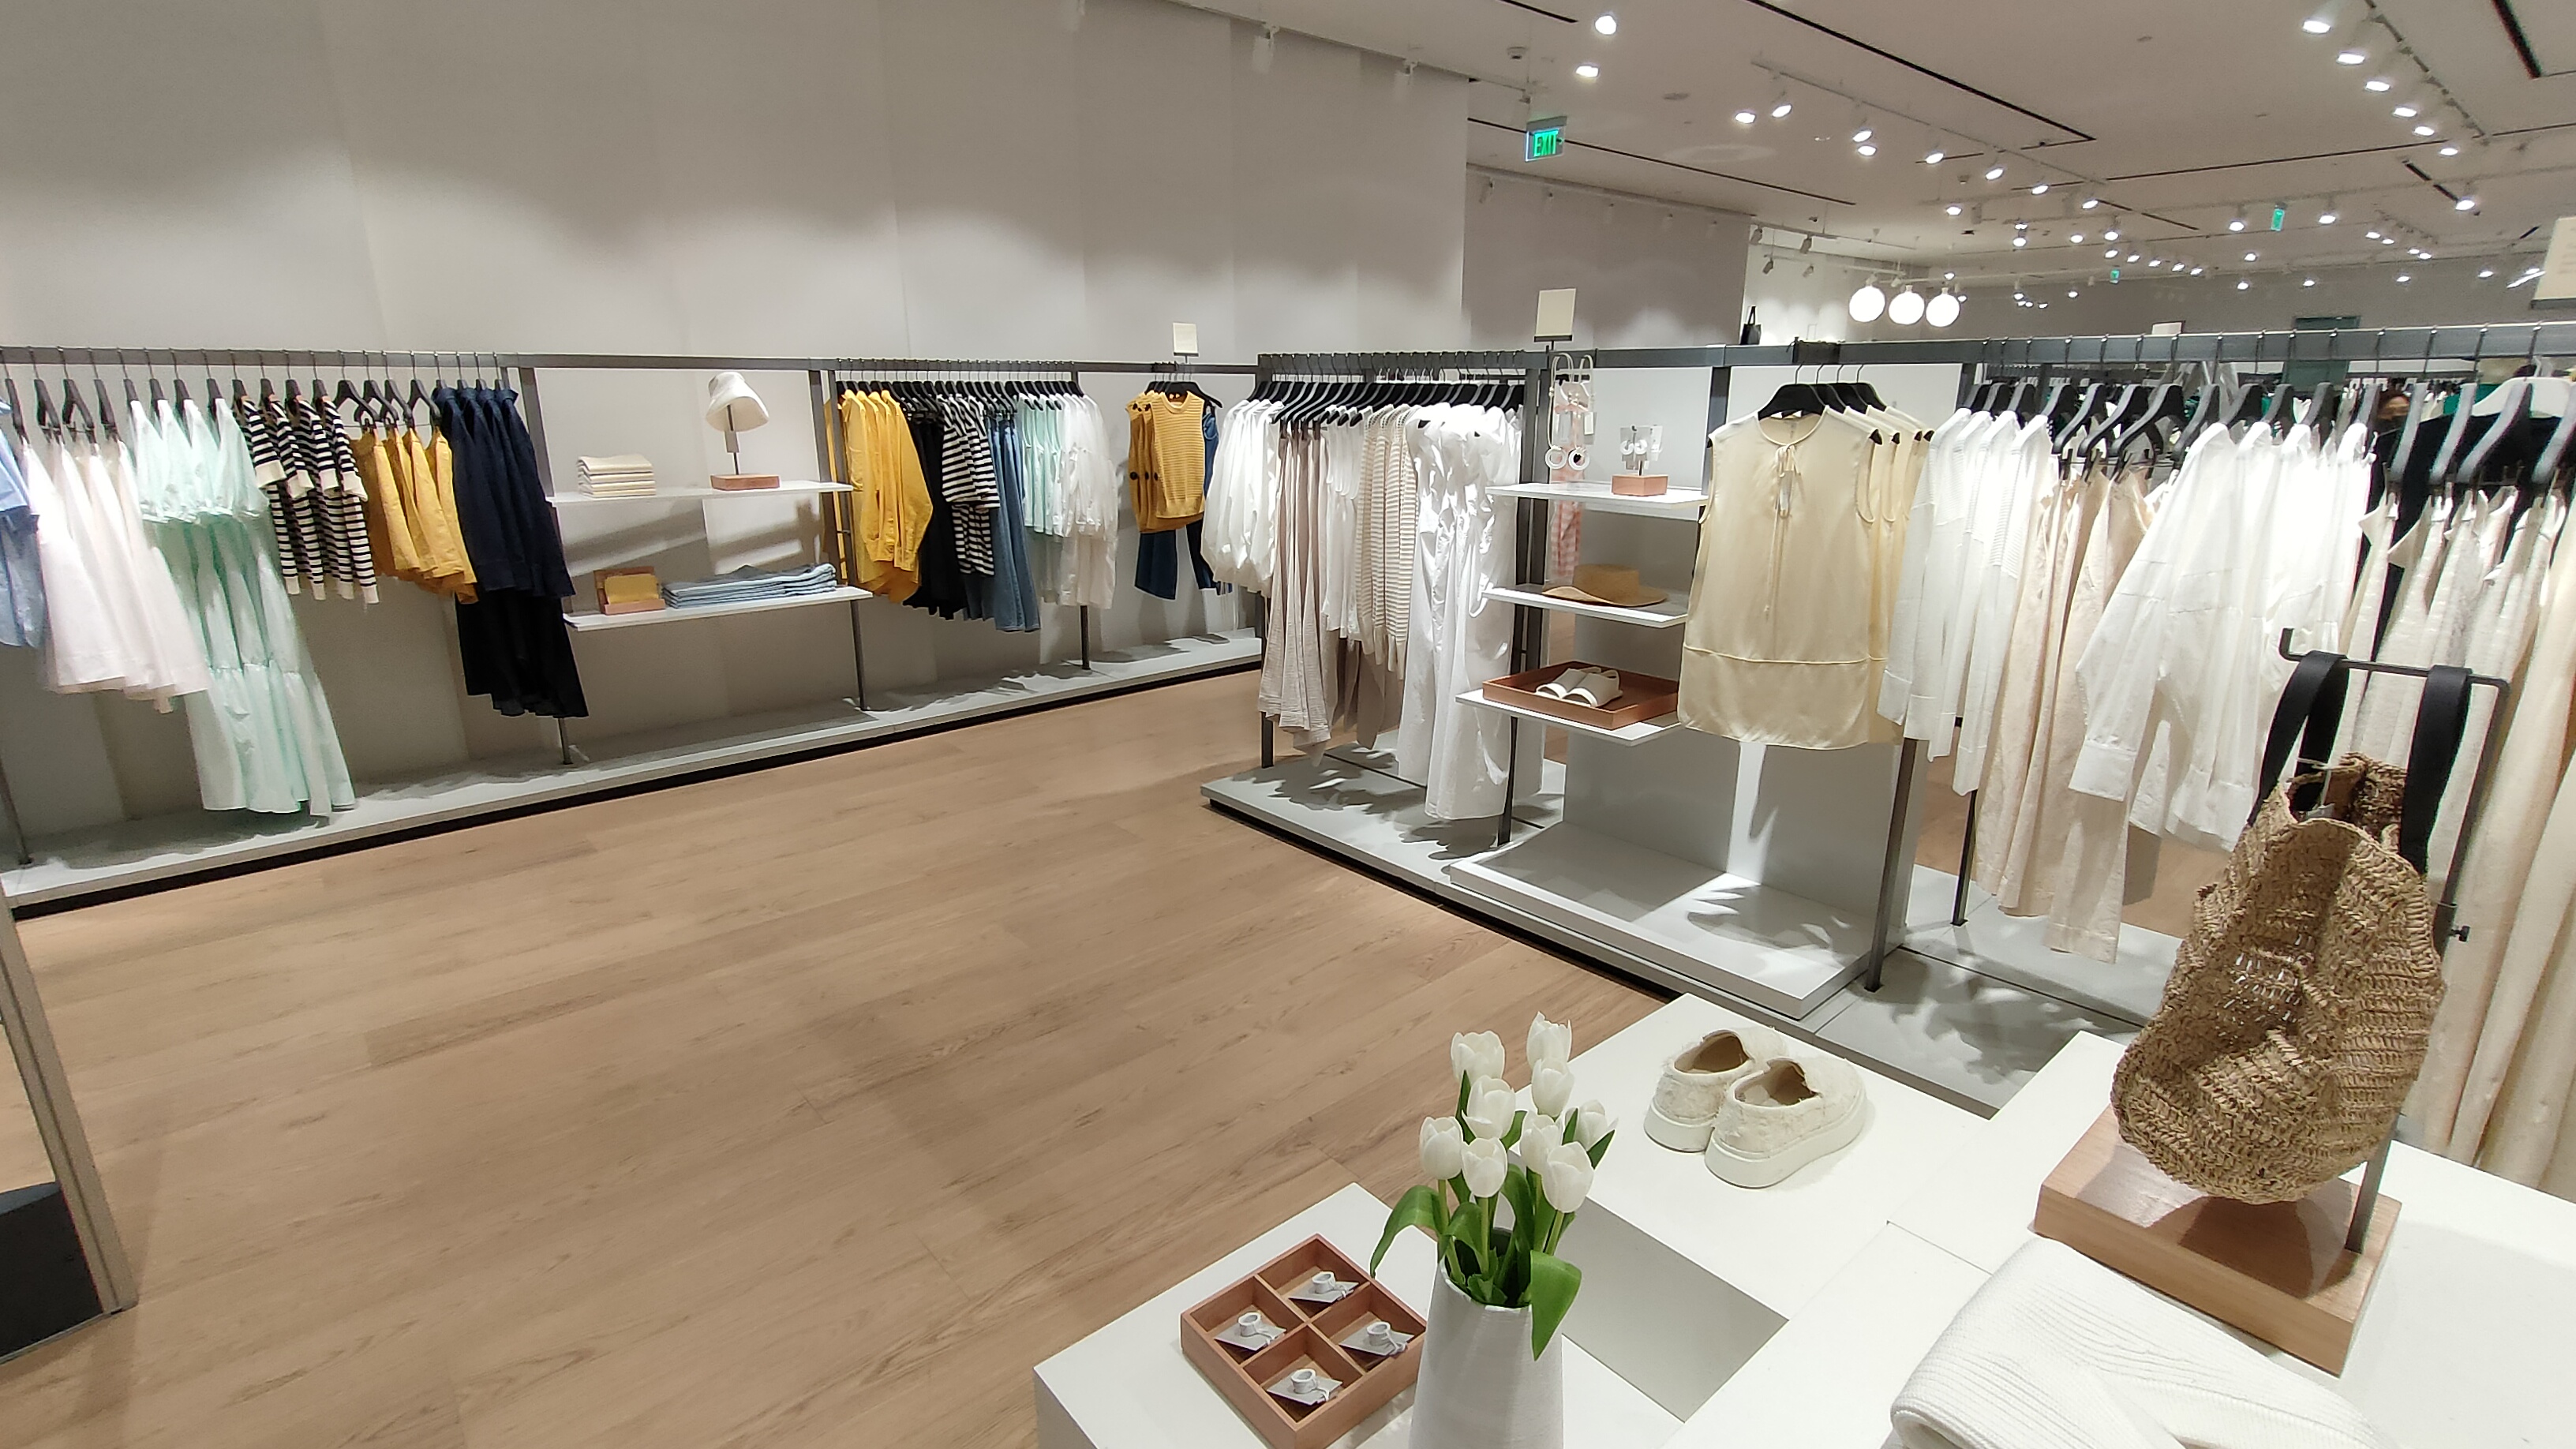 IN PHOTOS: COS opens first Philippine store at SM Aura